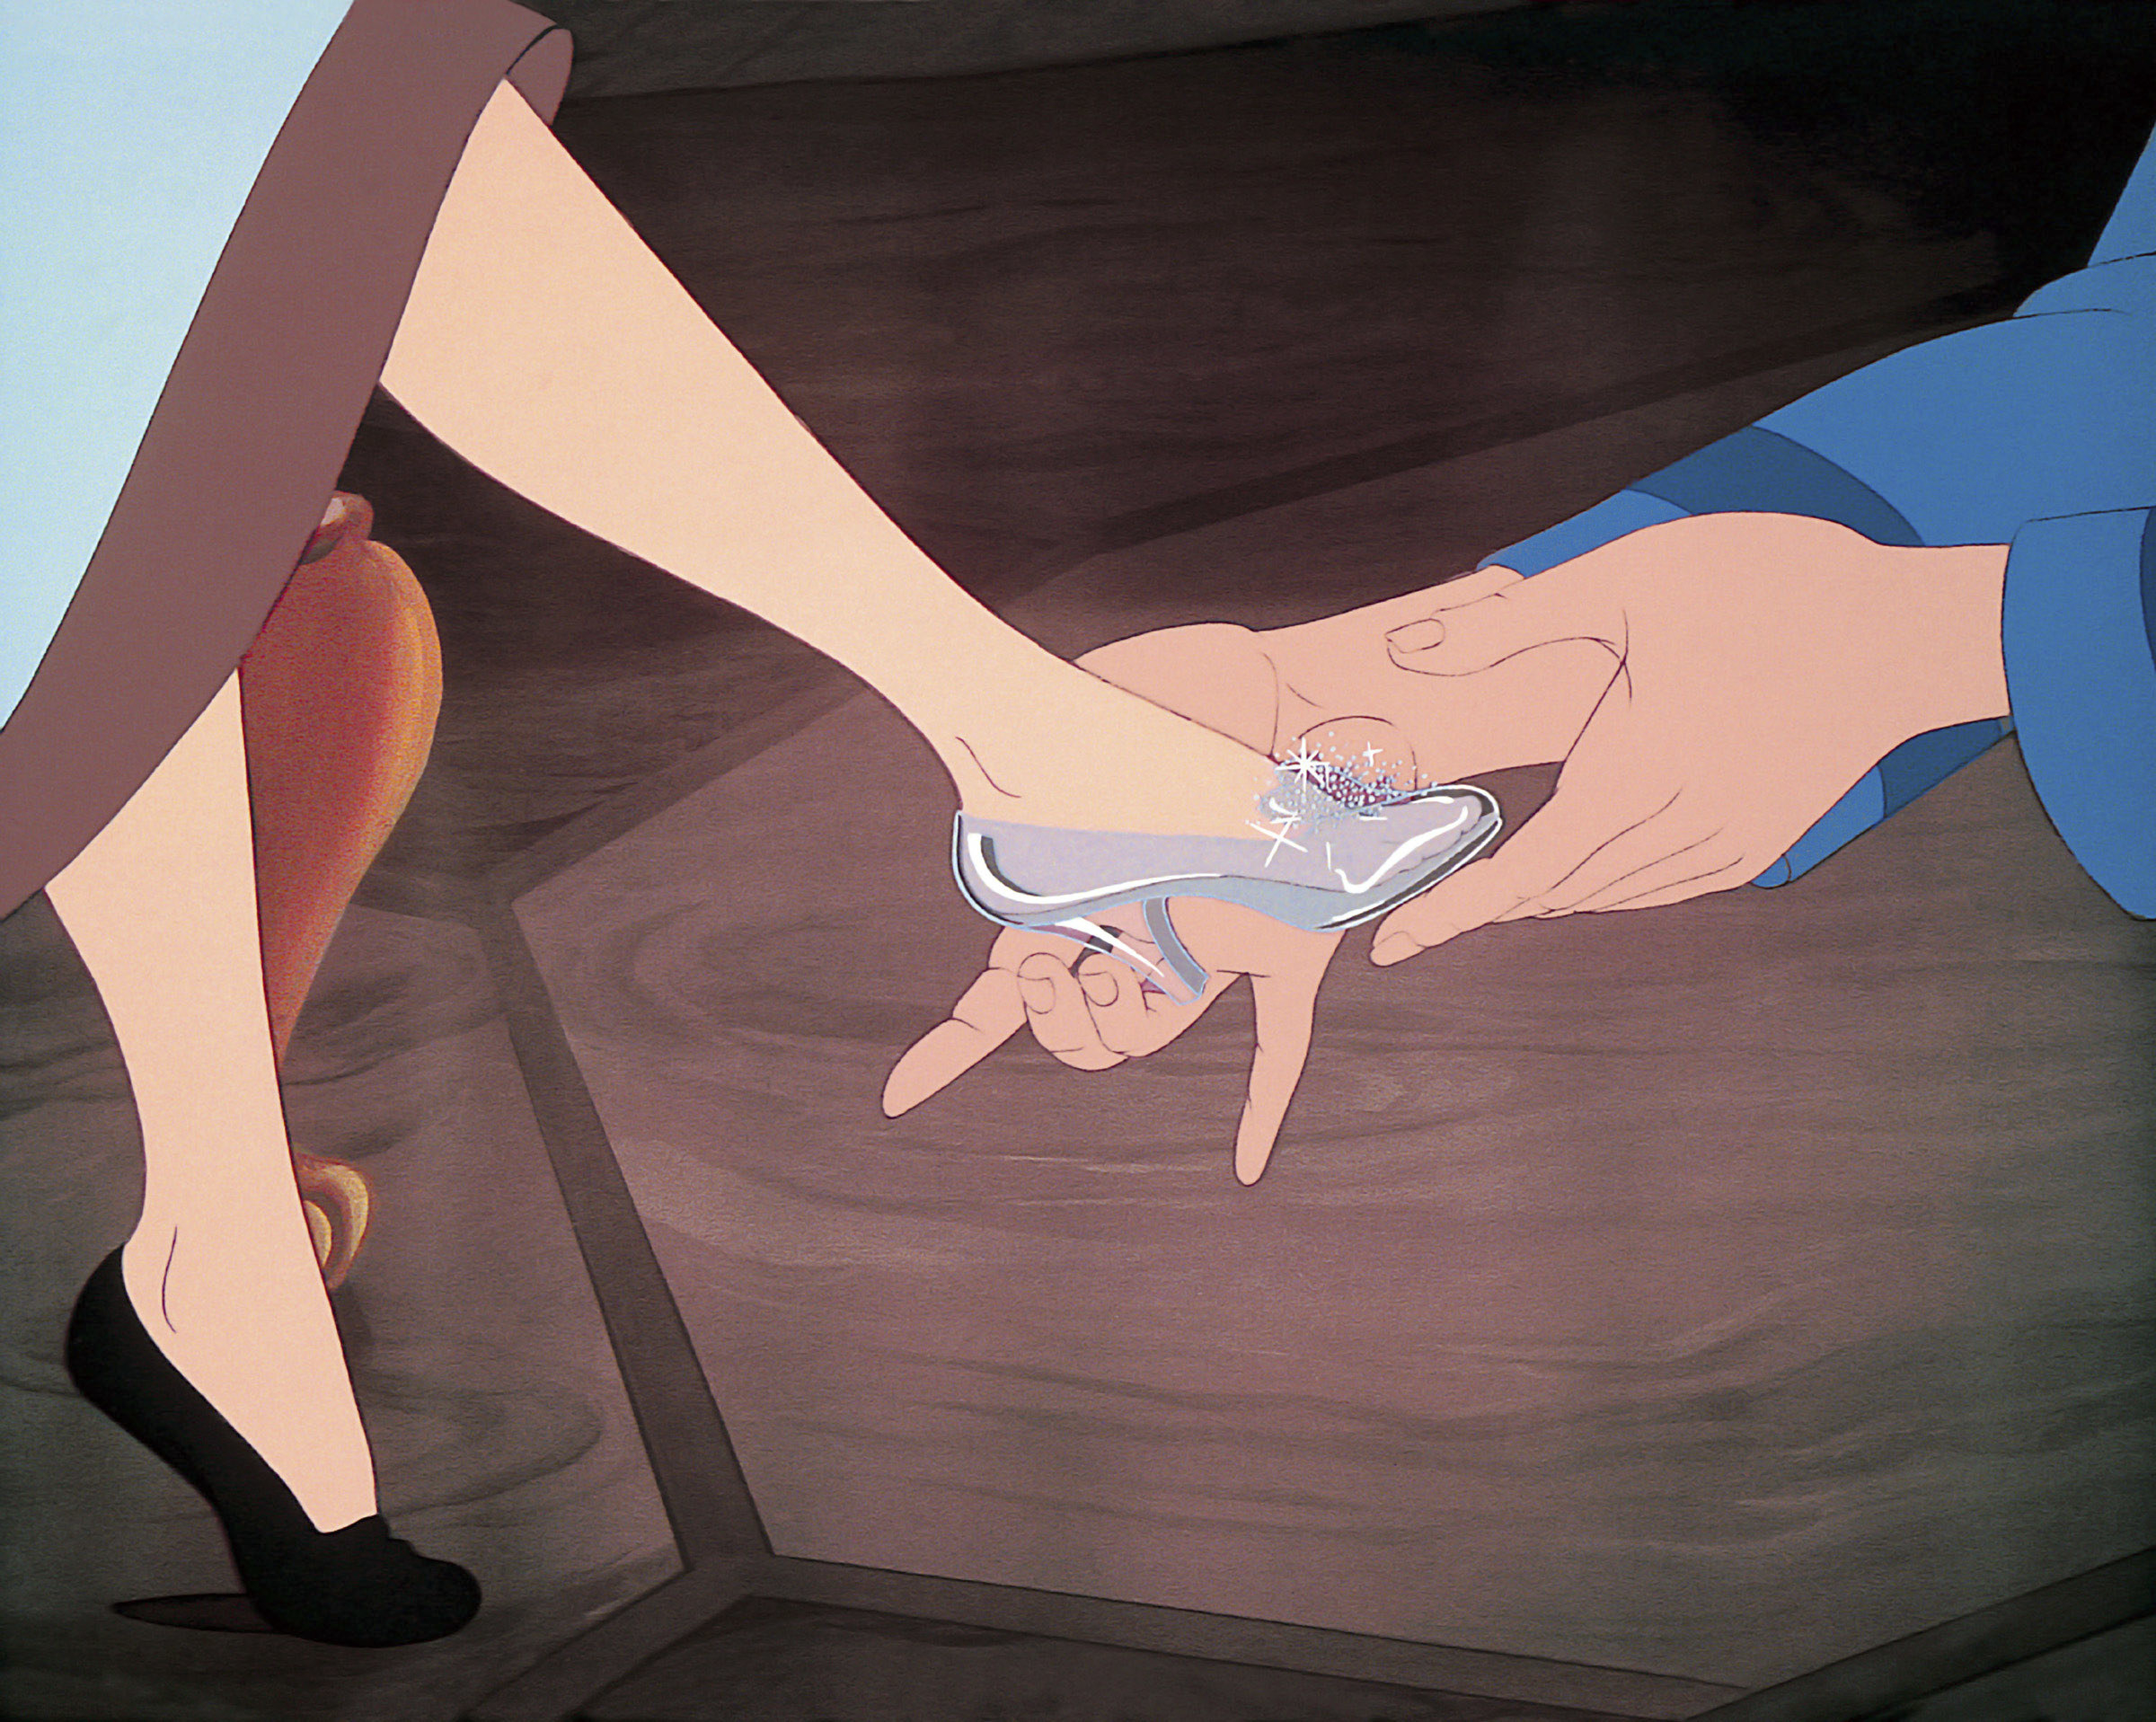 Cinderella getting the glass slipper put on her foot